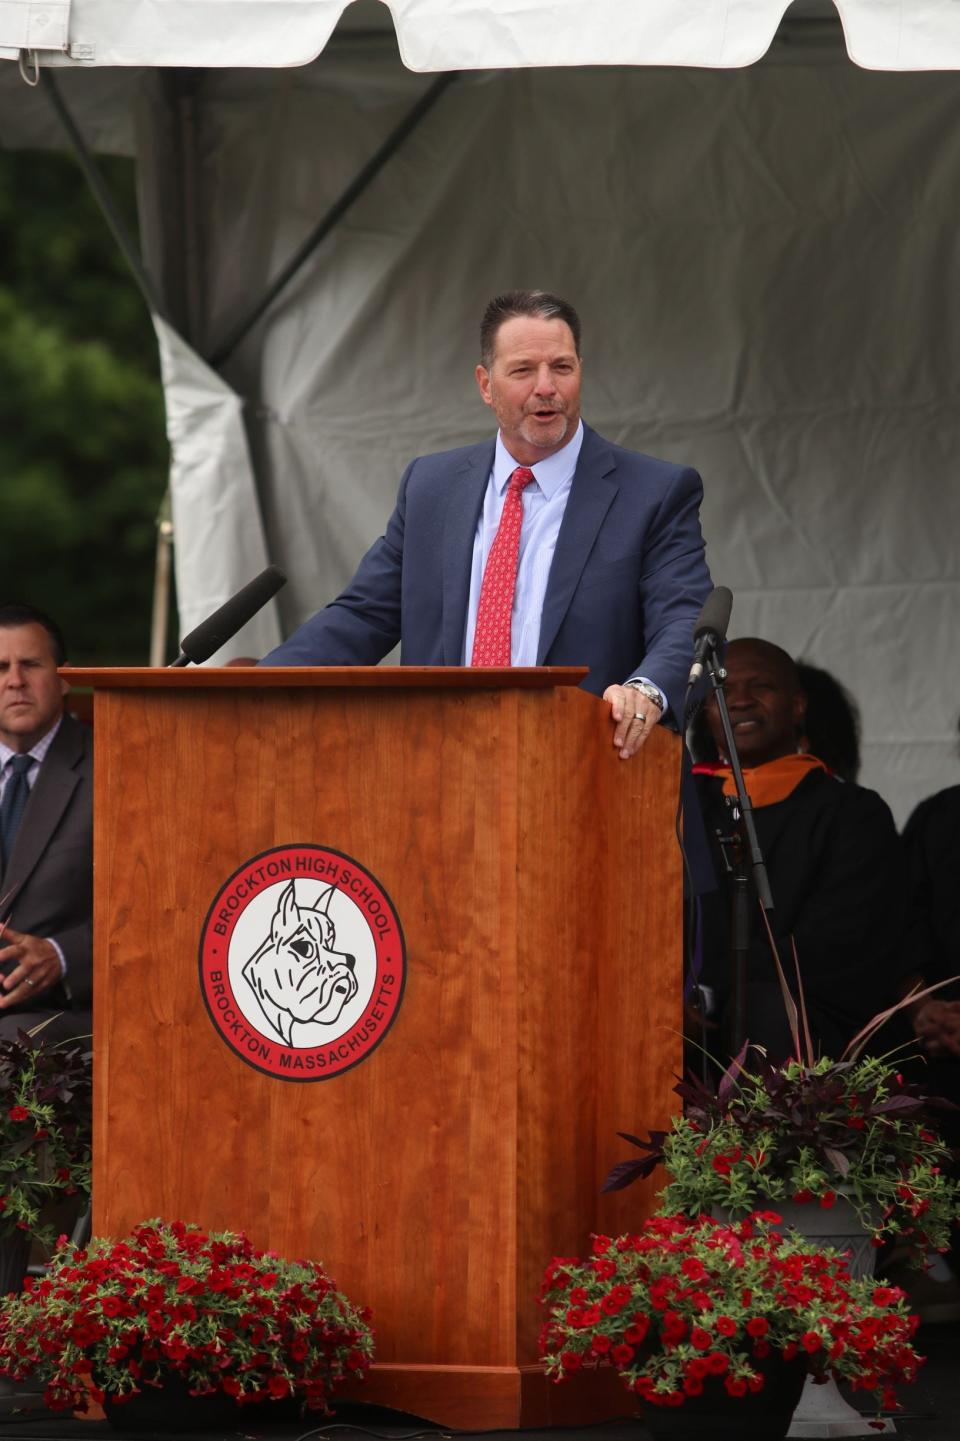 Brockton High School Superintendent Mike Thomas addresses the crowd during the graduation ceremony on Saturday, June 3, 2023.